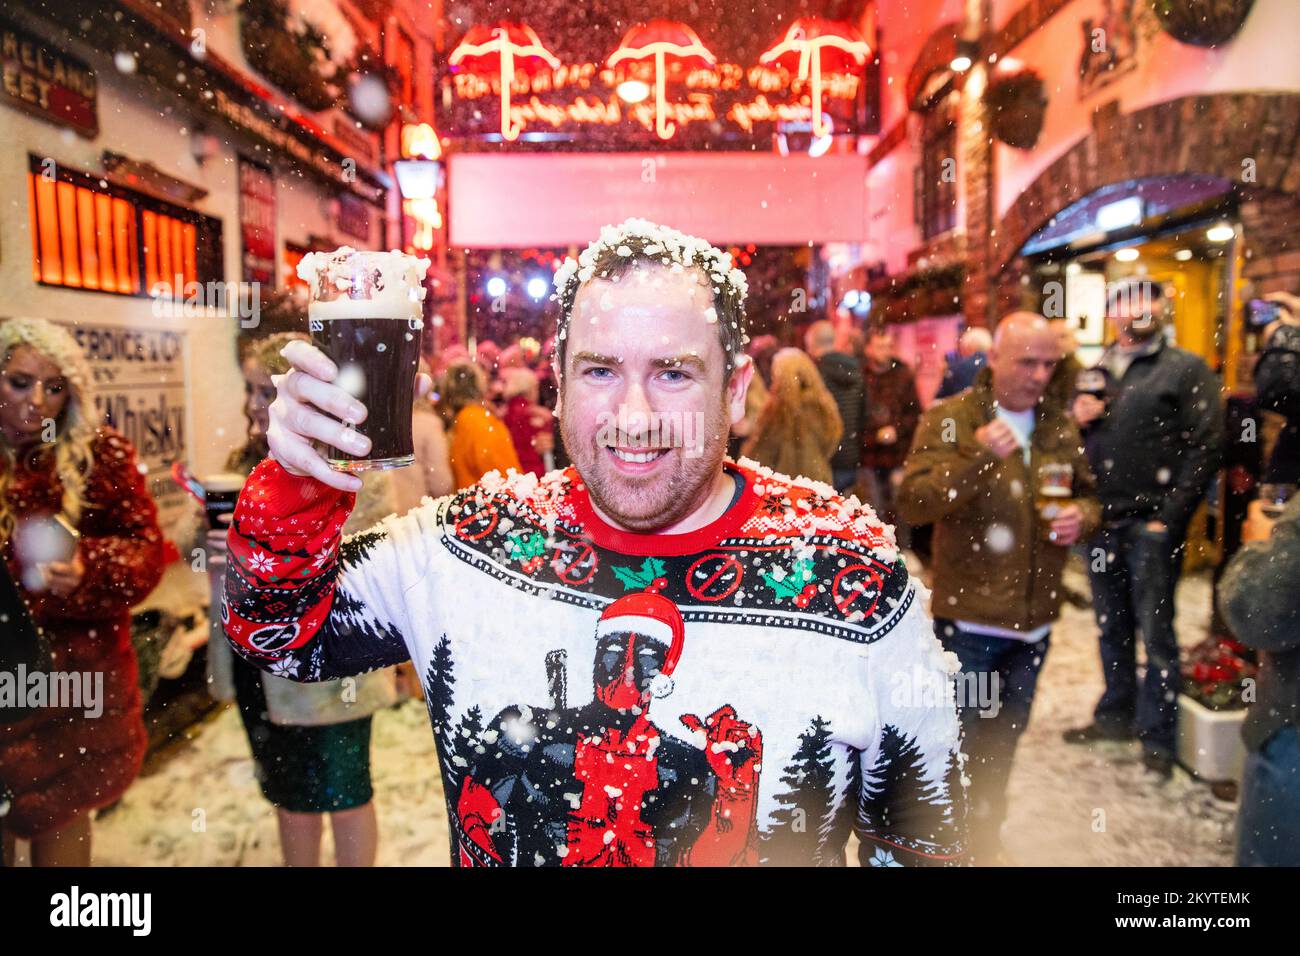 David Gibson on the cobbled streets of Commercial Court outside the Duke of York bar in Belfast as Guinness brought its iconic Christmas ad to life with a snow machine as guests were treated to a pint to start the festive season. Stock Photo